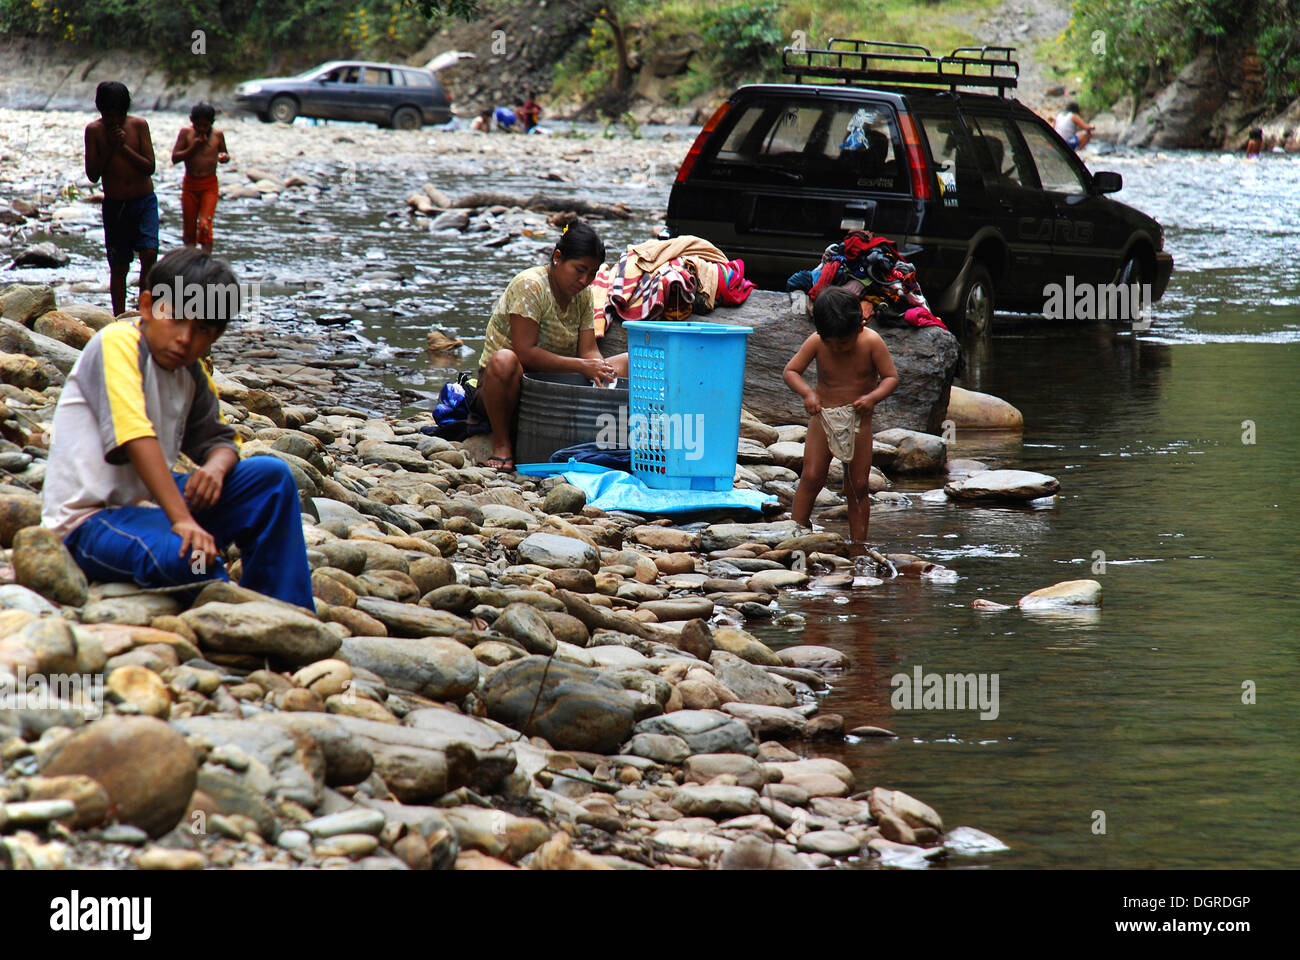 Washing clothes in a river, the Amazon, Bolivia, South America Stock Photo  - Alamy